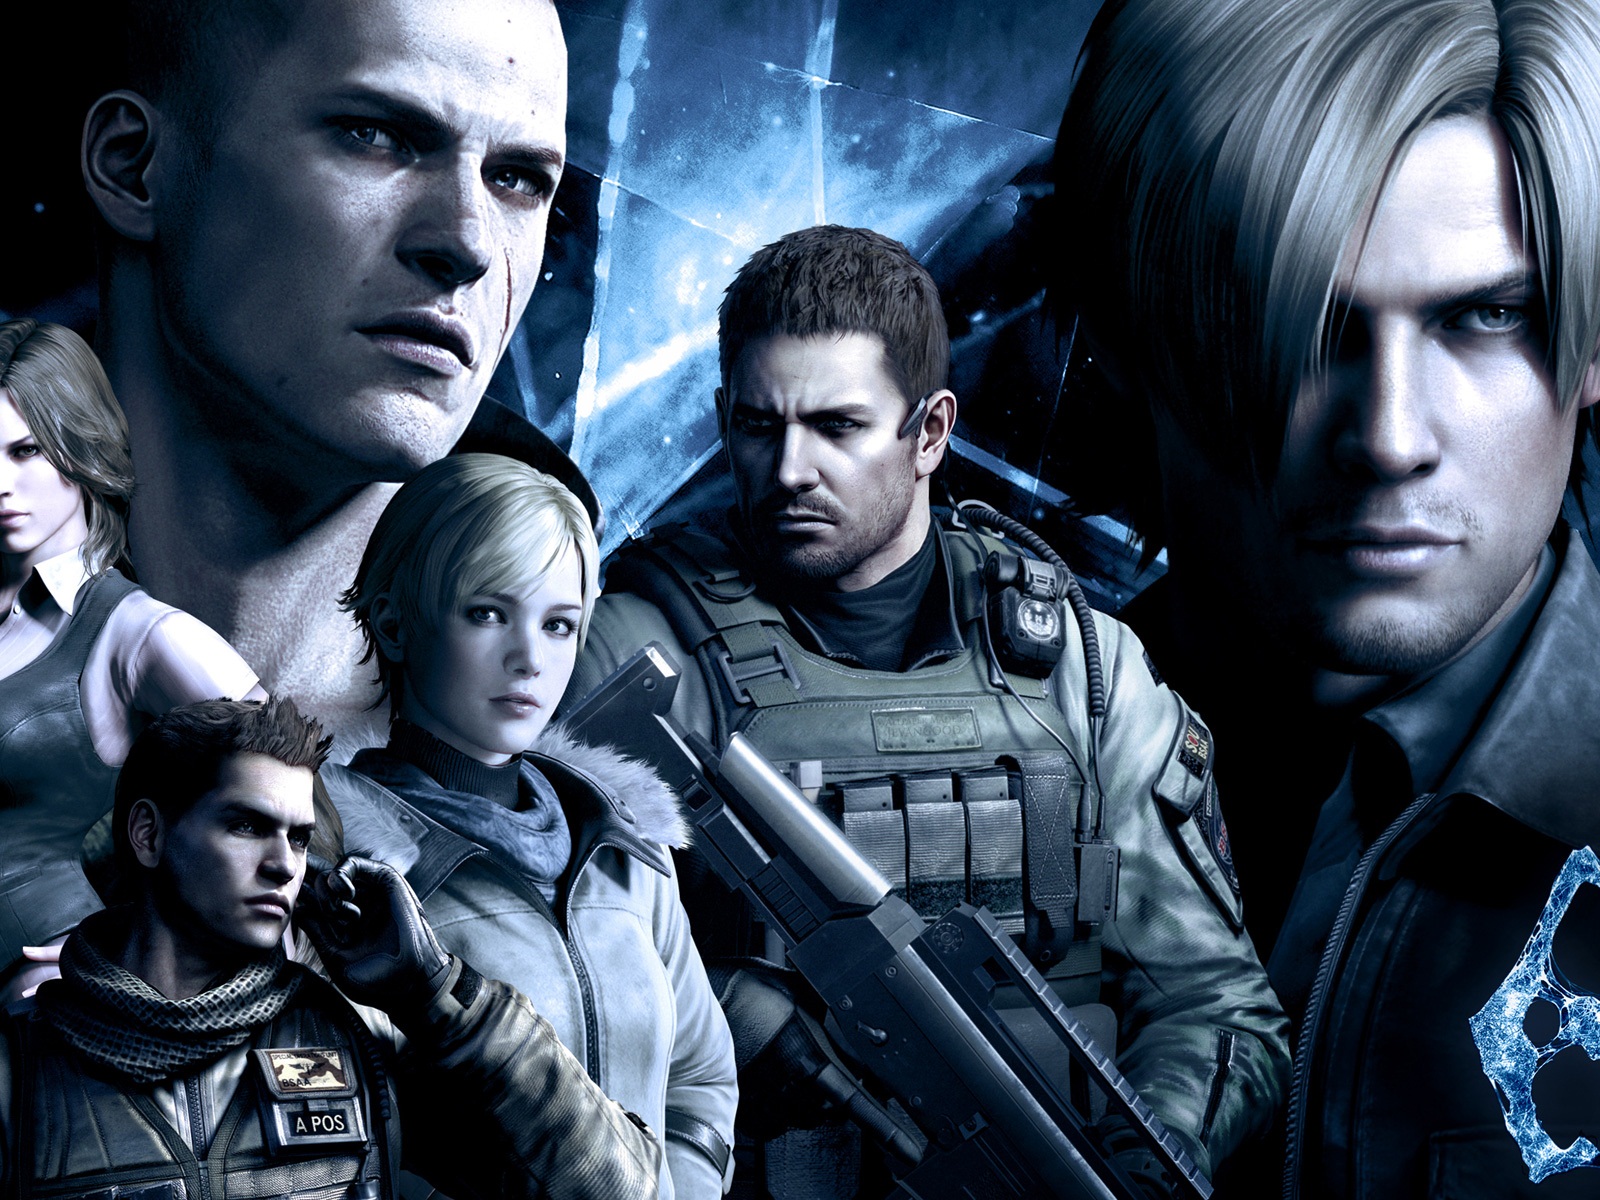 Resident Evil 6 HD game wallpapers #9 - 1600x1200